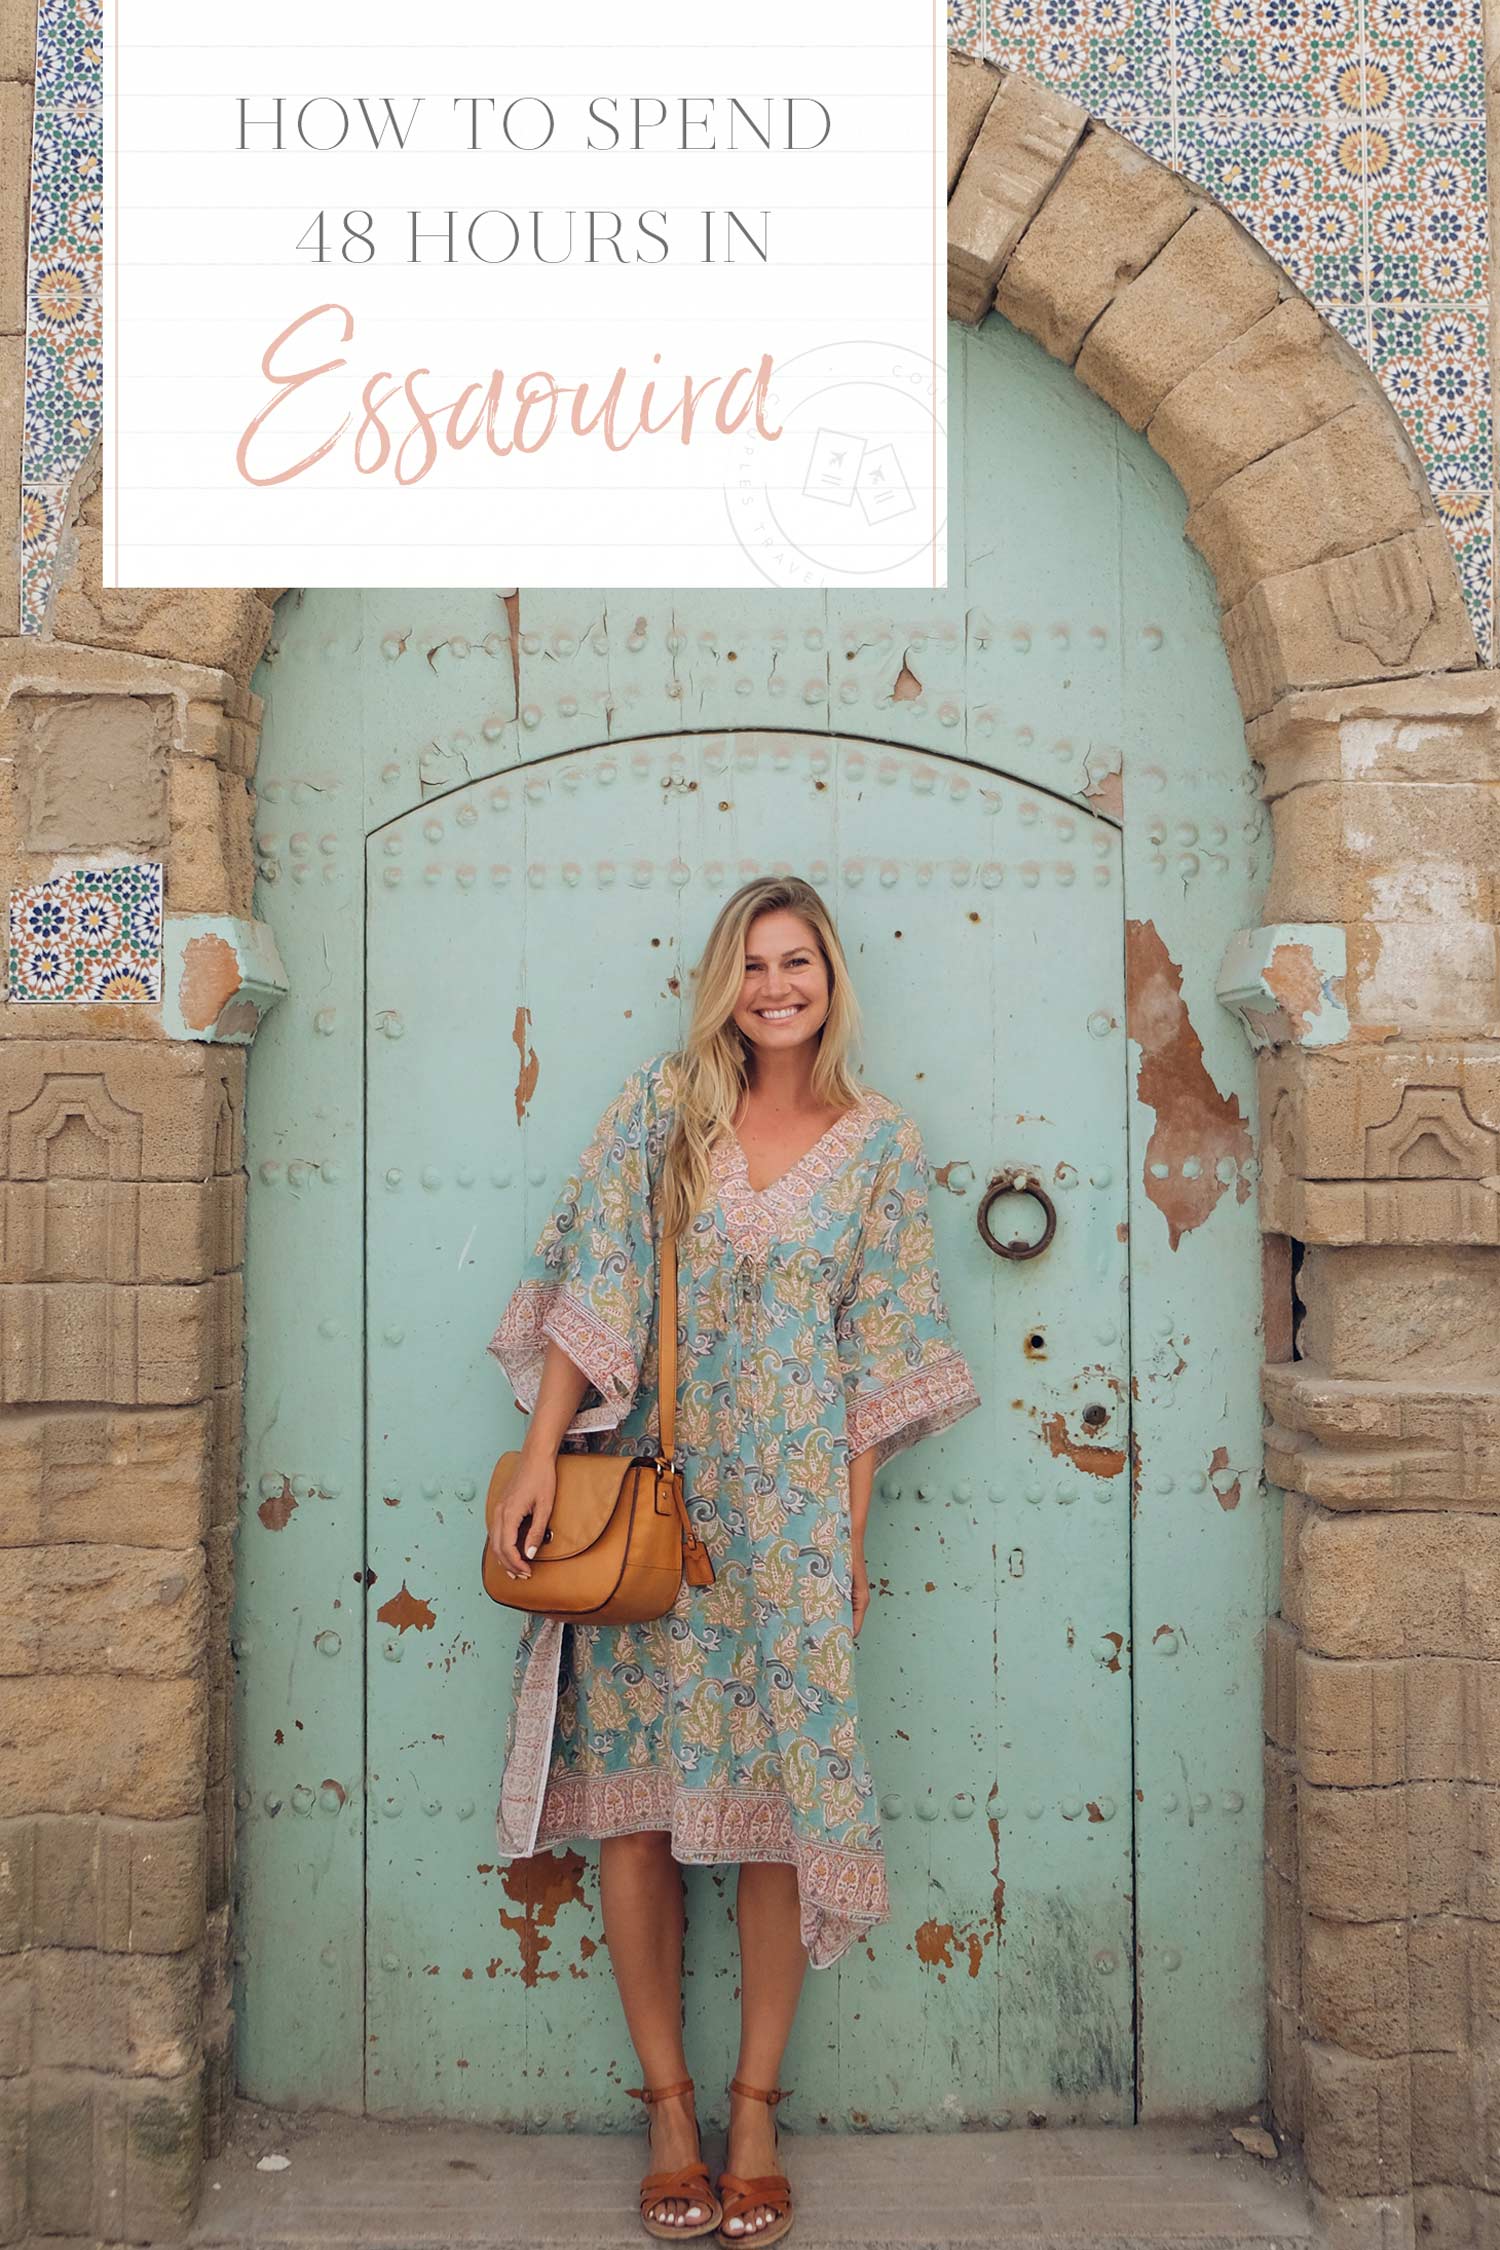 how to spend 48 hours in essaouira